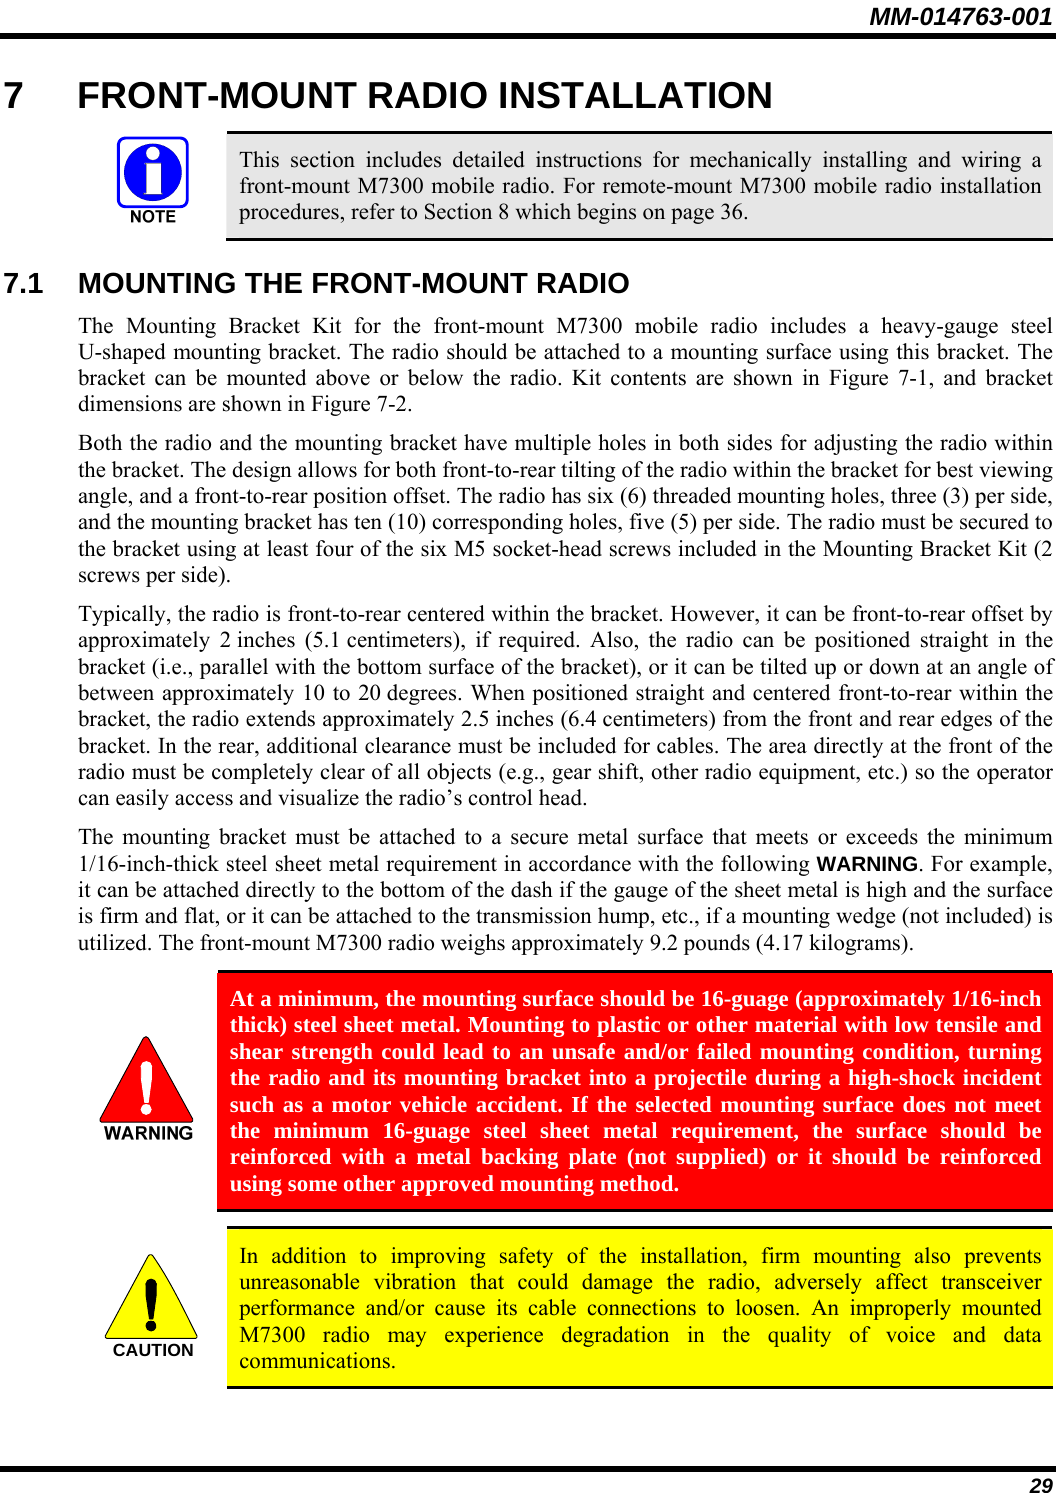 MM-014763-001 29 7  FRONT-MOUNT RADIO INSTALLATION   This section includes detailed instructions for mechanically installing and wiring a front-mount M7300 mobile radio. For remote-mount M7300 mobile radio installation procedures, refer to Section 8 which begins on page 36.  7.1  MOUNTING THE FRONT-MOUNT RADIO The Mounting Bracket Kit for the front-mount M7300 mobile radio includes a heavy-gauge steel U-shaped mounting bracket. The radio should be attached to a mounting surface using this bracket. The bracket can be mounted above or below the radio. Kit contents are shown in Figure 7-1, and bracket dimensions are shown in Figure 7-2. Both the radio and the mounting bracket have multiple holes in both sides for adjusting the radio within the bracket. The design allows for both front-to-rear tilting of the radio within the bracket for best viewing angle, and a front-to-rear position offset. The radio has six (6) threaded mounting holes, three (3) per side, and the mounting bracket has ten (10) corresponding holes, five (5) per side. The radio must be secured to the bracket using at least four of the six M5 socket-head screws included in the Mounting Bracket Kit (2 screws per side). Typically, the radio is front-to-rear centered within the bracket. However, it can be front-to-rear offset by approximately 2 inches (5.1 centimeters), if required. Also, the radio can be positioned straight in the bracket (i.e., parallel with the bottom surface of the bracket), or it can be tilted up or down at an angle of between approximately 10 to 20 degrees. When positioned straight and centered front-to-rear within the bracket, the radio extends approximately 2.5 inches (6.4 centimeters) from the front and rear edges of the bracket. In the rear, additional clearance must be included for cables. The area directly at the front of the radio must be completely clear of all objects (e.g., gear shift, other radio equipment, etc.) so the operator can easily access and visualize the radio’s control head. The mounting bracket must be attached to a secure metal surface that meets or exceeds the minimum 1/16-inch-thick steel sheet metal requirement in accordance with the following WARNING. For example, it can be attached directly to the bottom of the dash if the gauge of the sheet metal is high and the surface is firm and flat, or it can be attached to the transmission hump, etc., if a mounting wedge (not included) is utilized. The front-mount M7300 radio weighs approximately 9.2 pounds (4.17 kilograms).   At a minimum, the mounting surface should be 16-guage (approximately 1/16-inch thick) steel sheet metal. Mounting to plastic or other material with low tensile and shear strength could lead to an unsafe and/or failed mounting condition, turning the radio and its mounting bracket into a projectile during a high-shock incident such as a motor vehicle accident. If the selected mounting surface does not meet the minimum 16-guage steel sheet metal requirement, the surface should be reinforced with a metal backing plate (not supplied) or it should be reinforced using some other approved mounting method.  CAUTION  In addition to improving safety of the installation, firm mounting also prevents unreasonable vibration that could damage the radio, adversely affect transceiver performance and/or cause its cable connections to loosen. An improperly mounted M7300 radio may experience degradation in the quality of voice and data communications. 